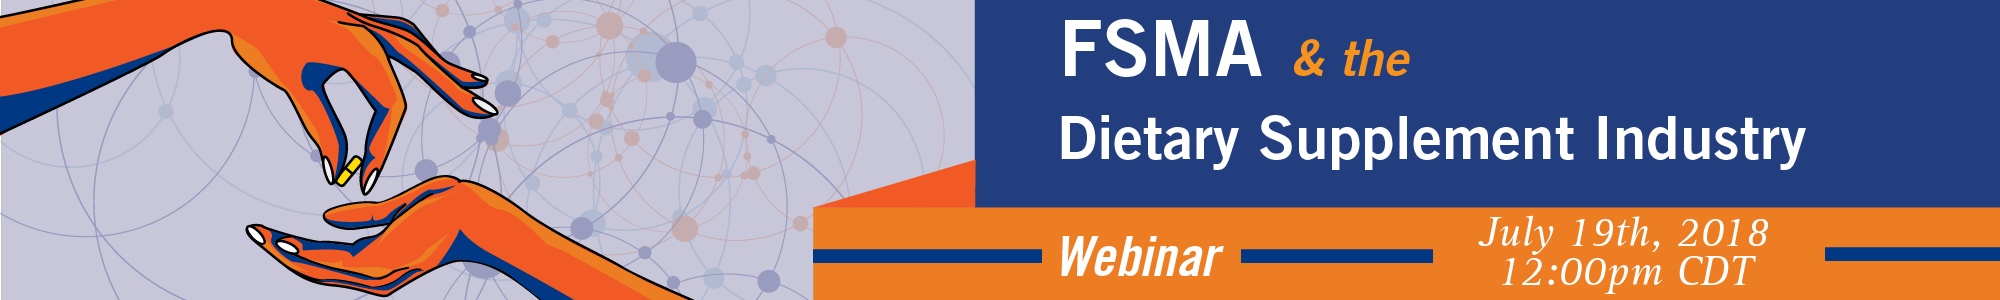 FSMA and the Dietary Supplement Industry 